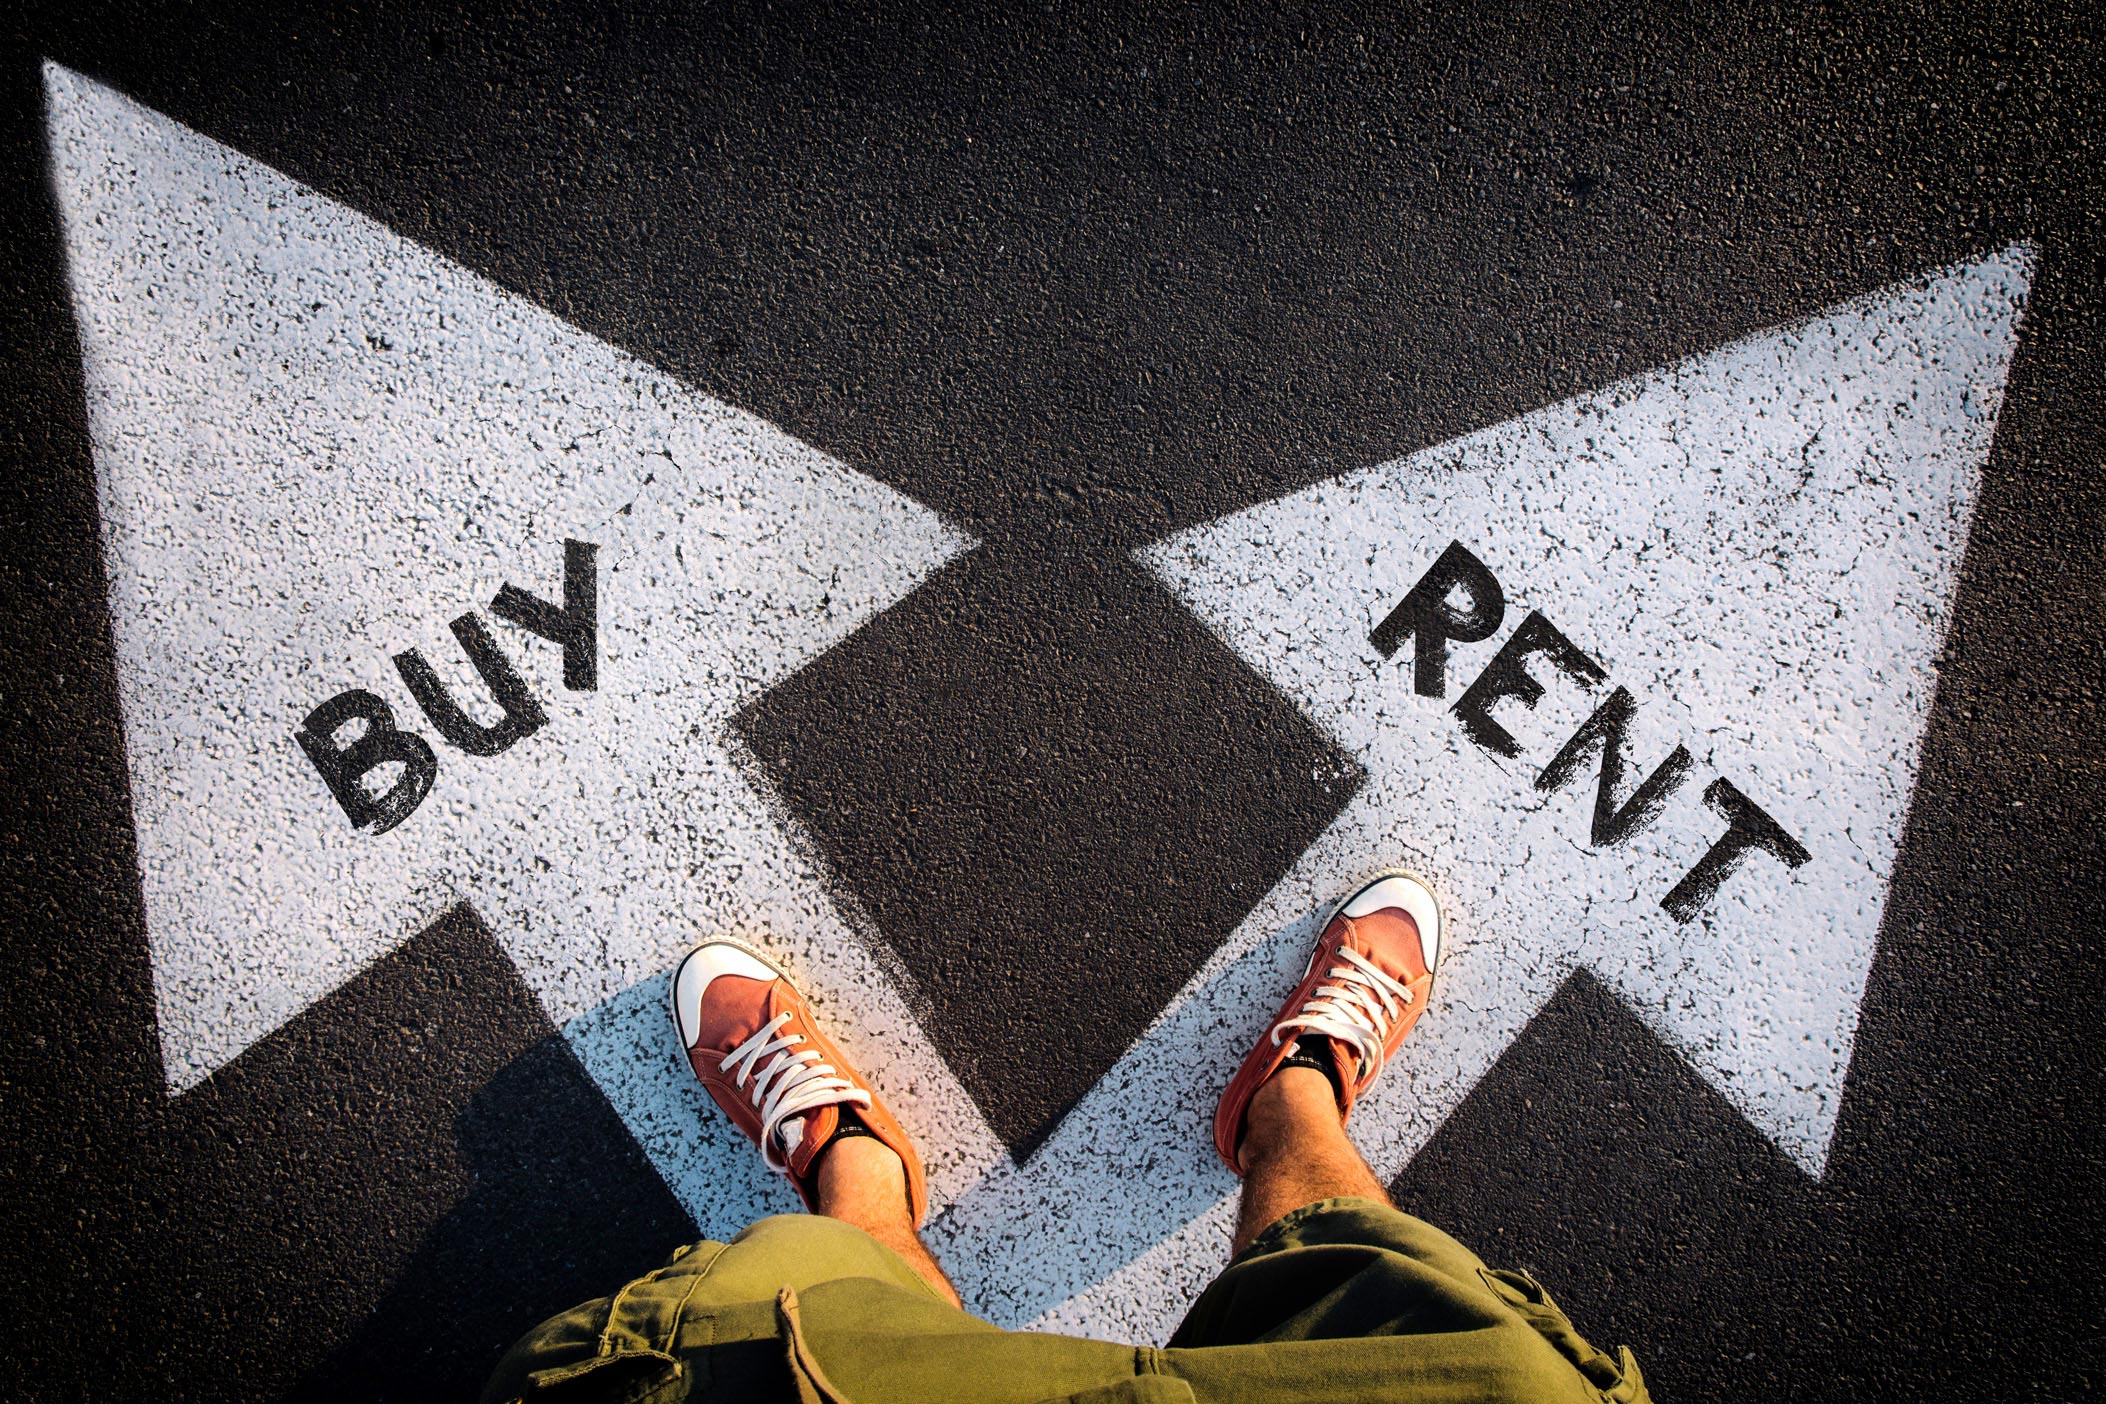 Rent or Buy - which is best? - GD Legal